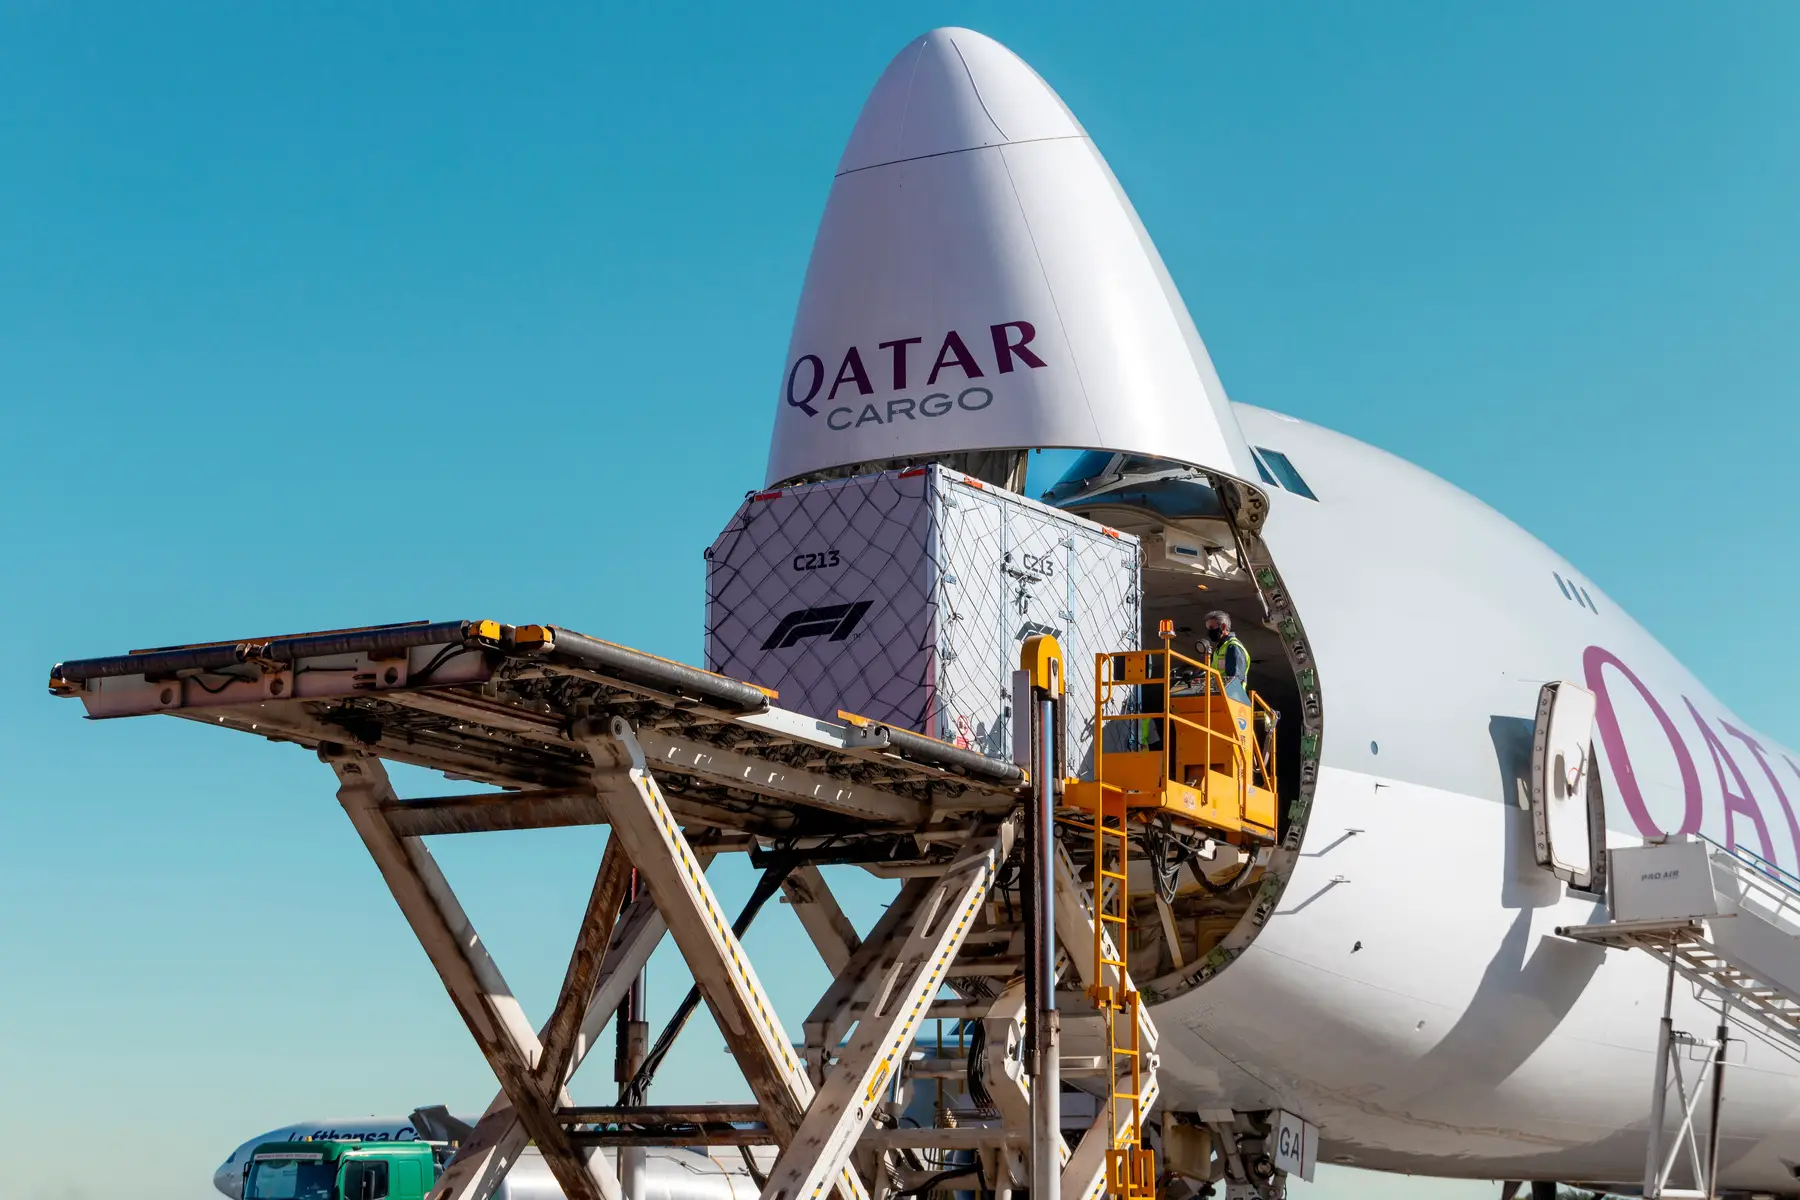 a Qatar Cargo plane being loaded with freight